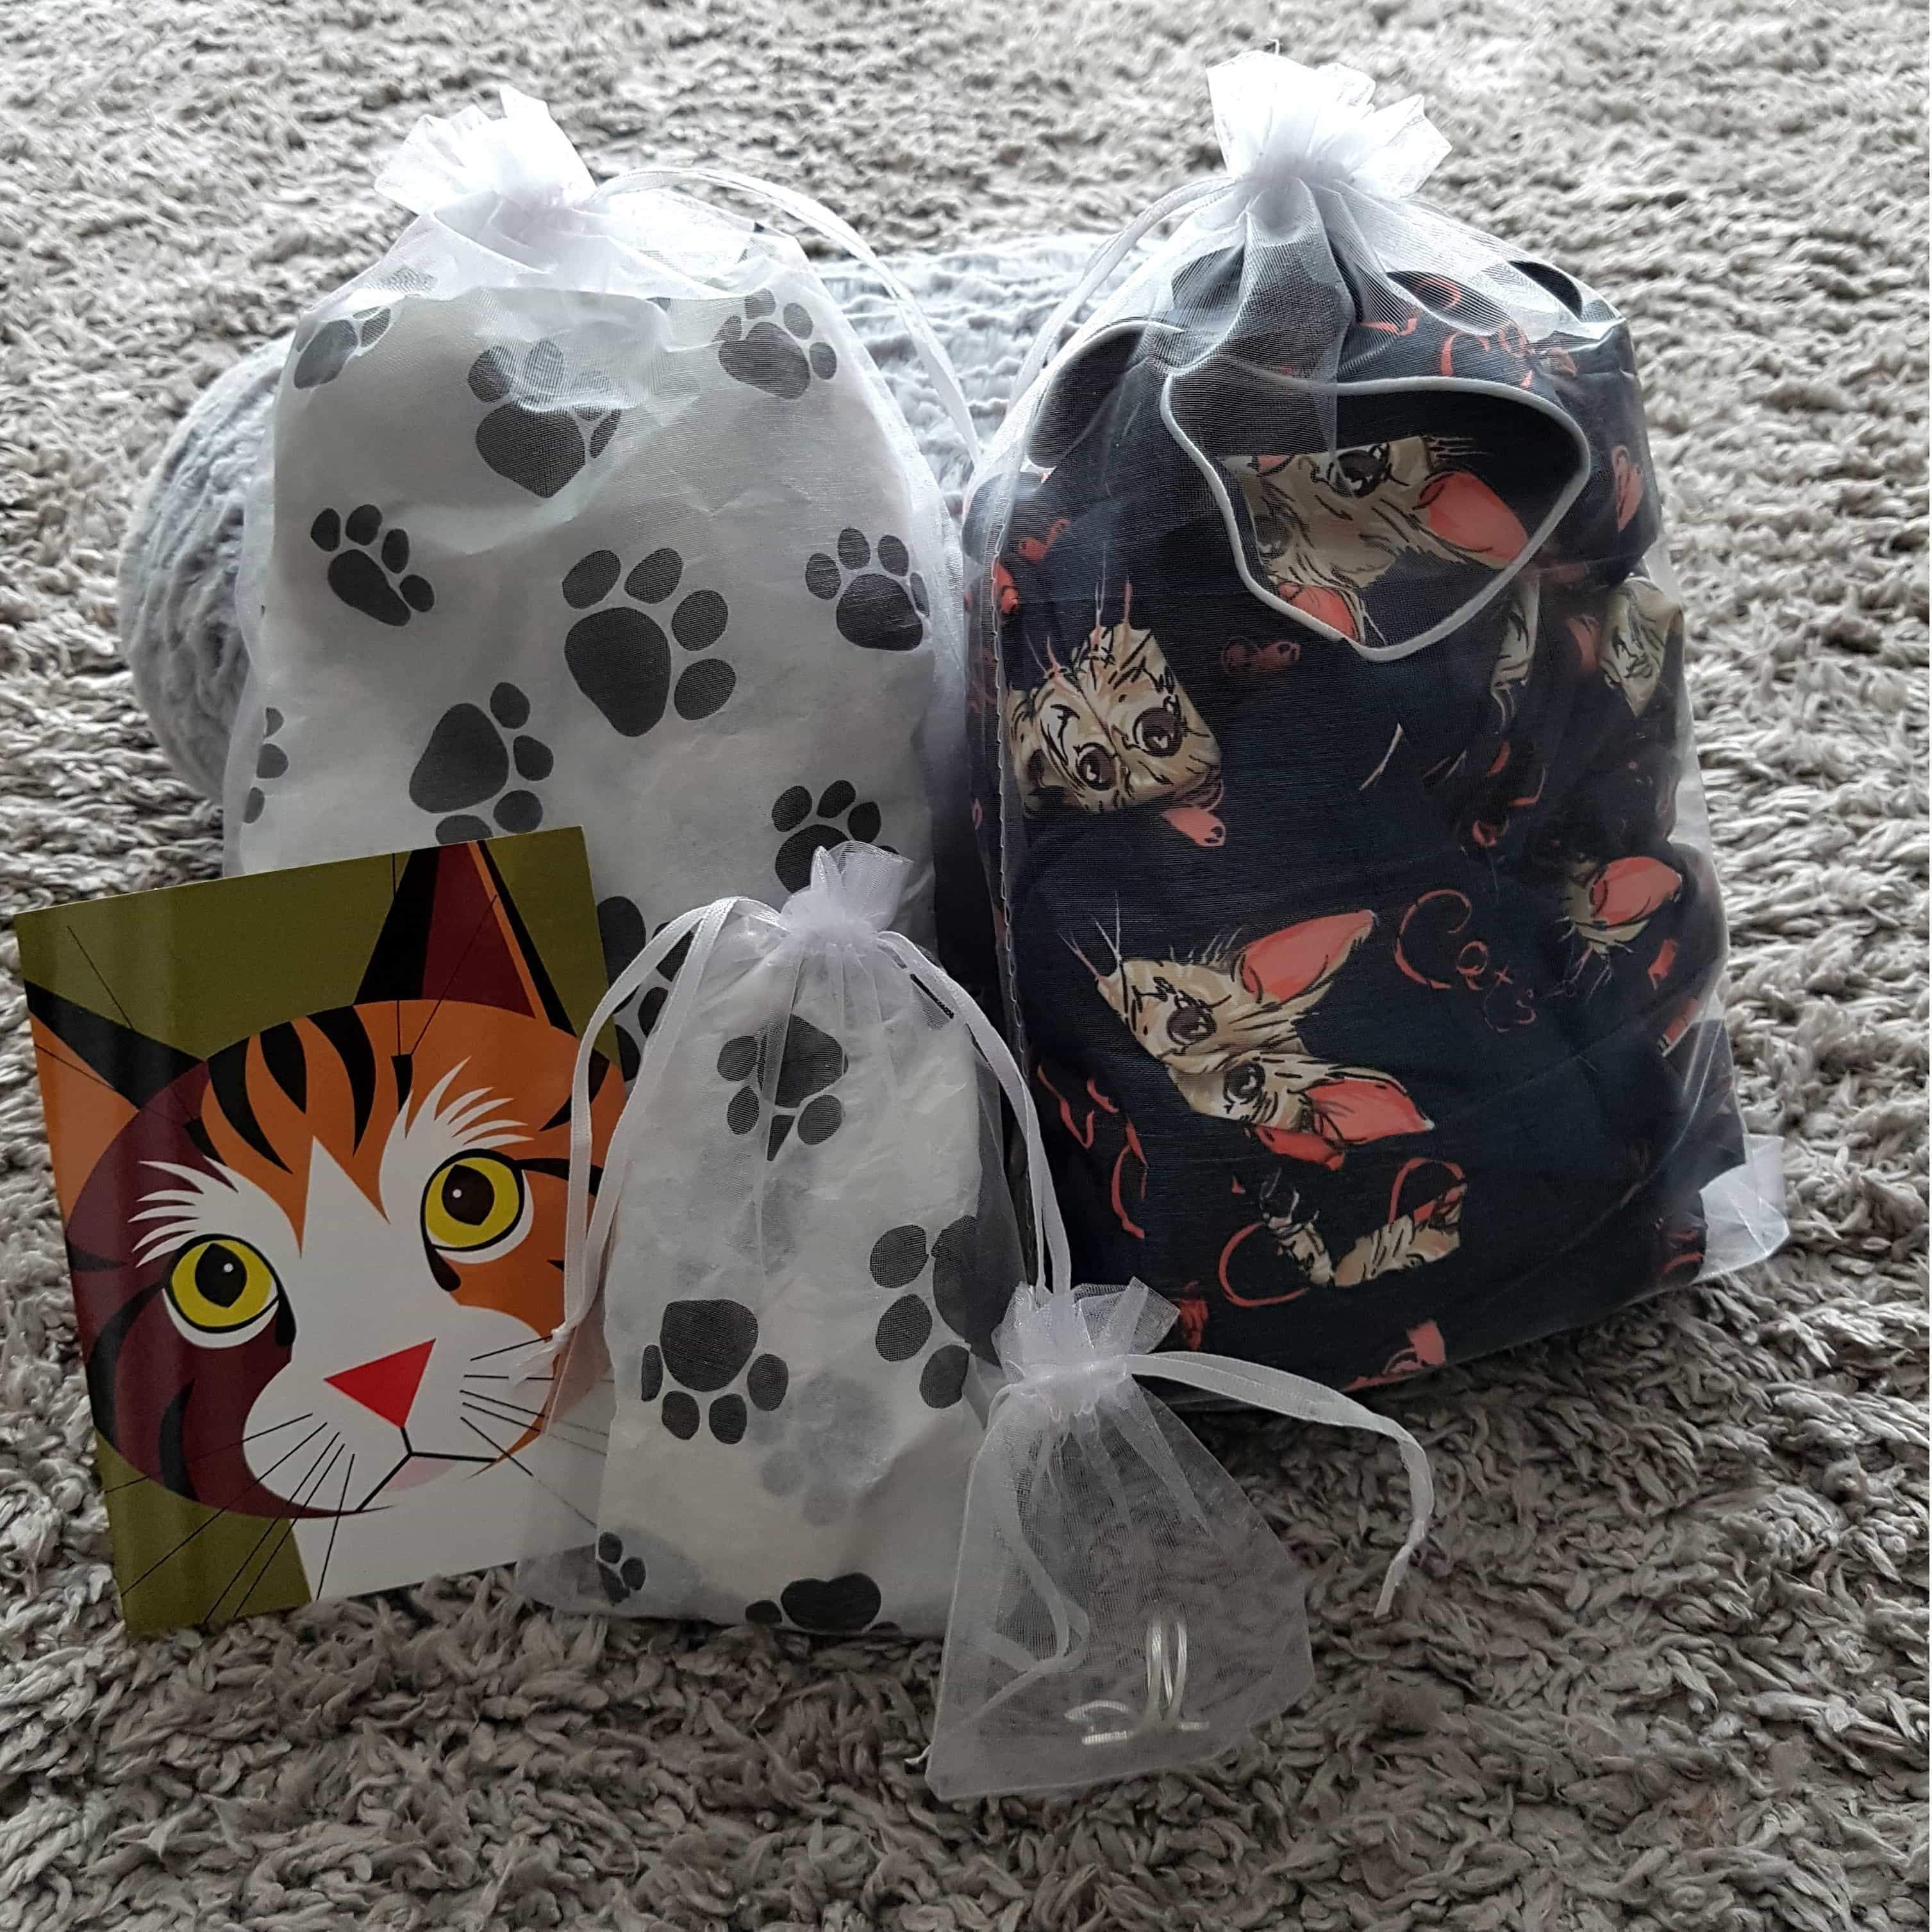 Wrap the perfect cat themed gift in these sweet gift bags paw print tissue and add a cat card!